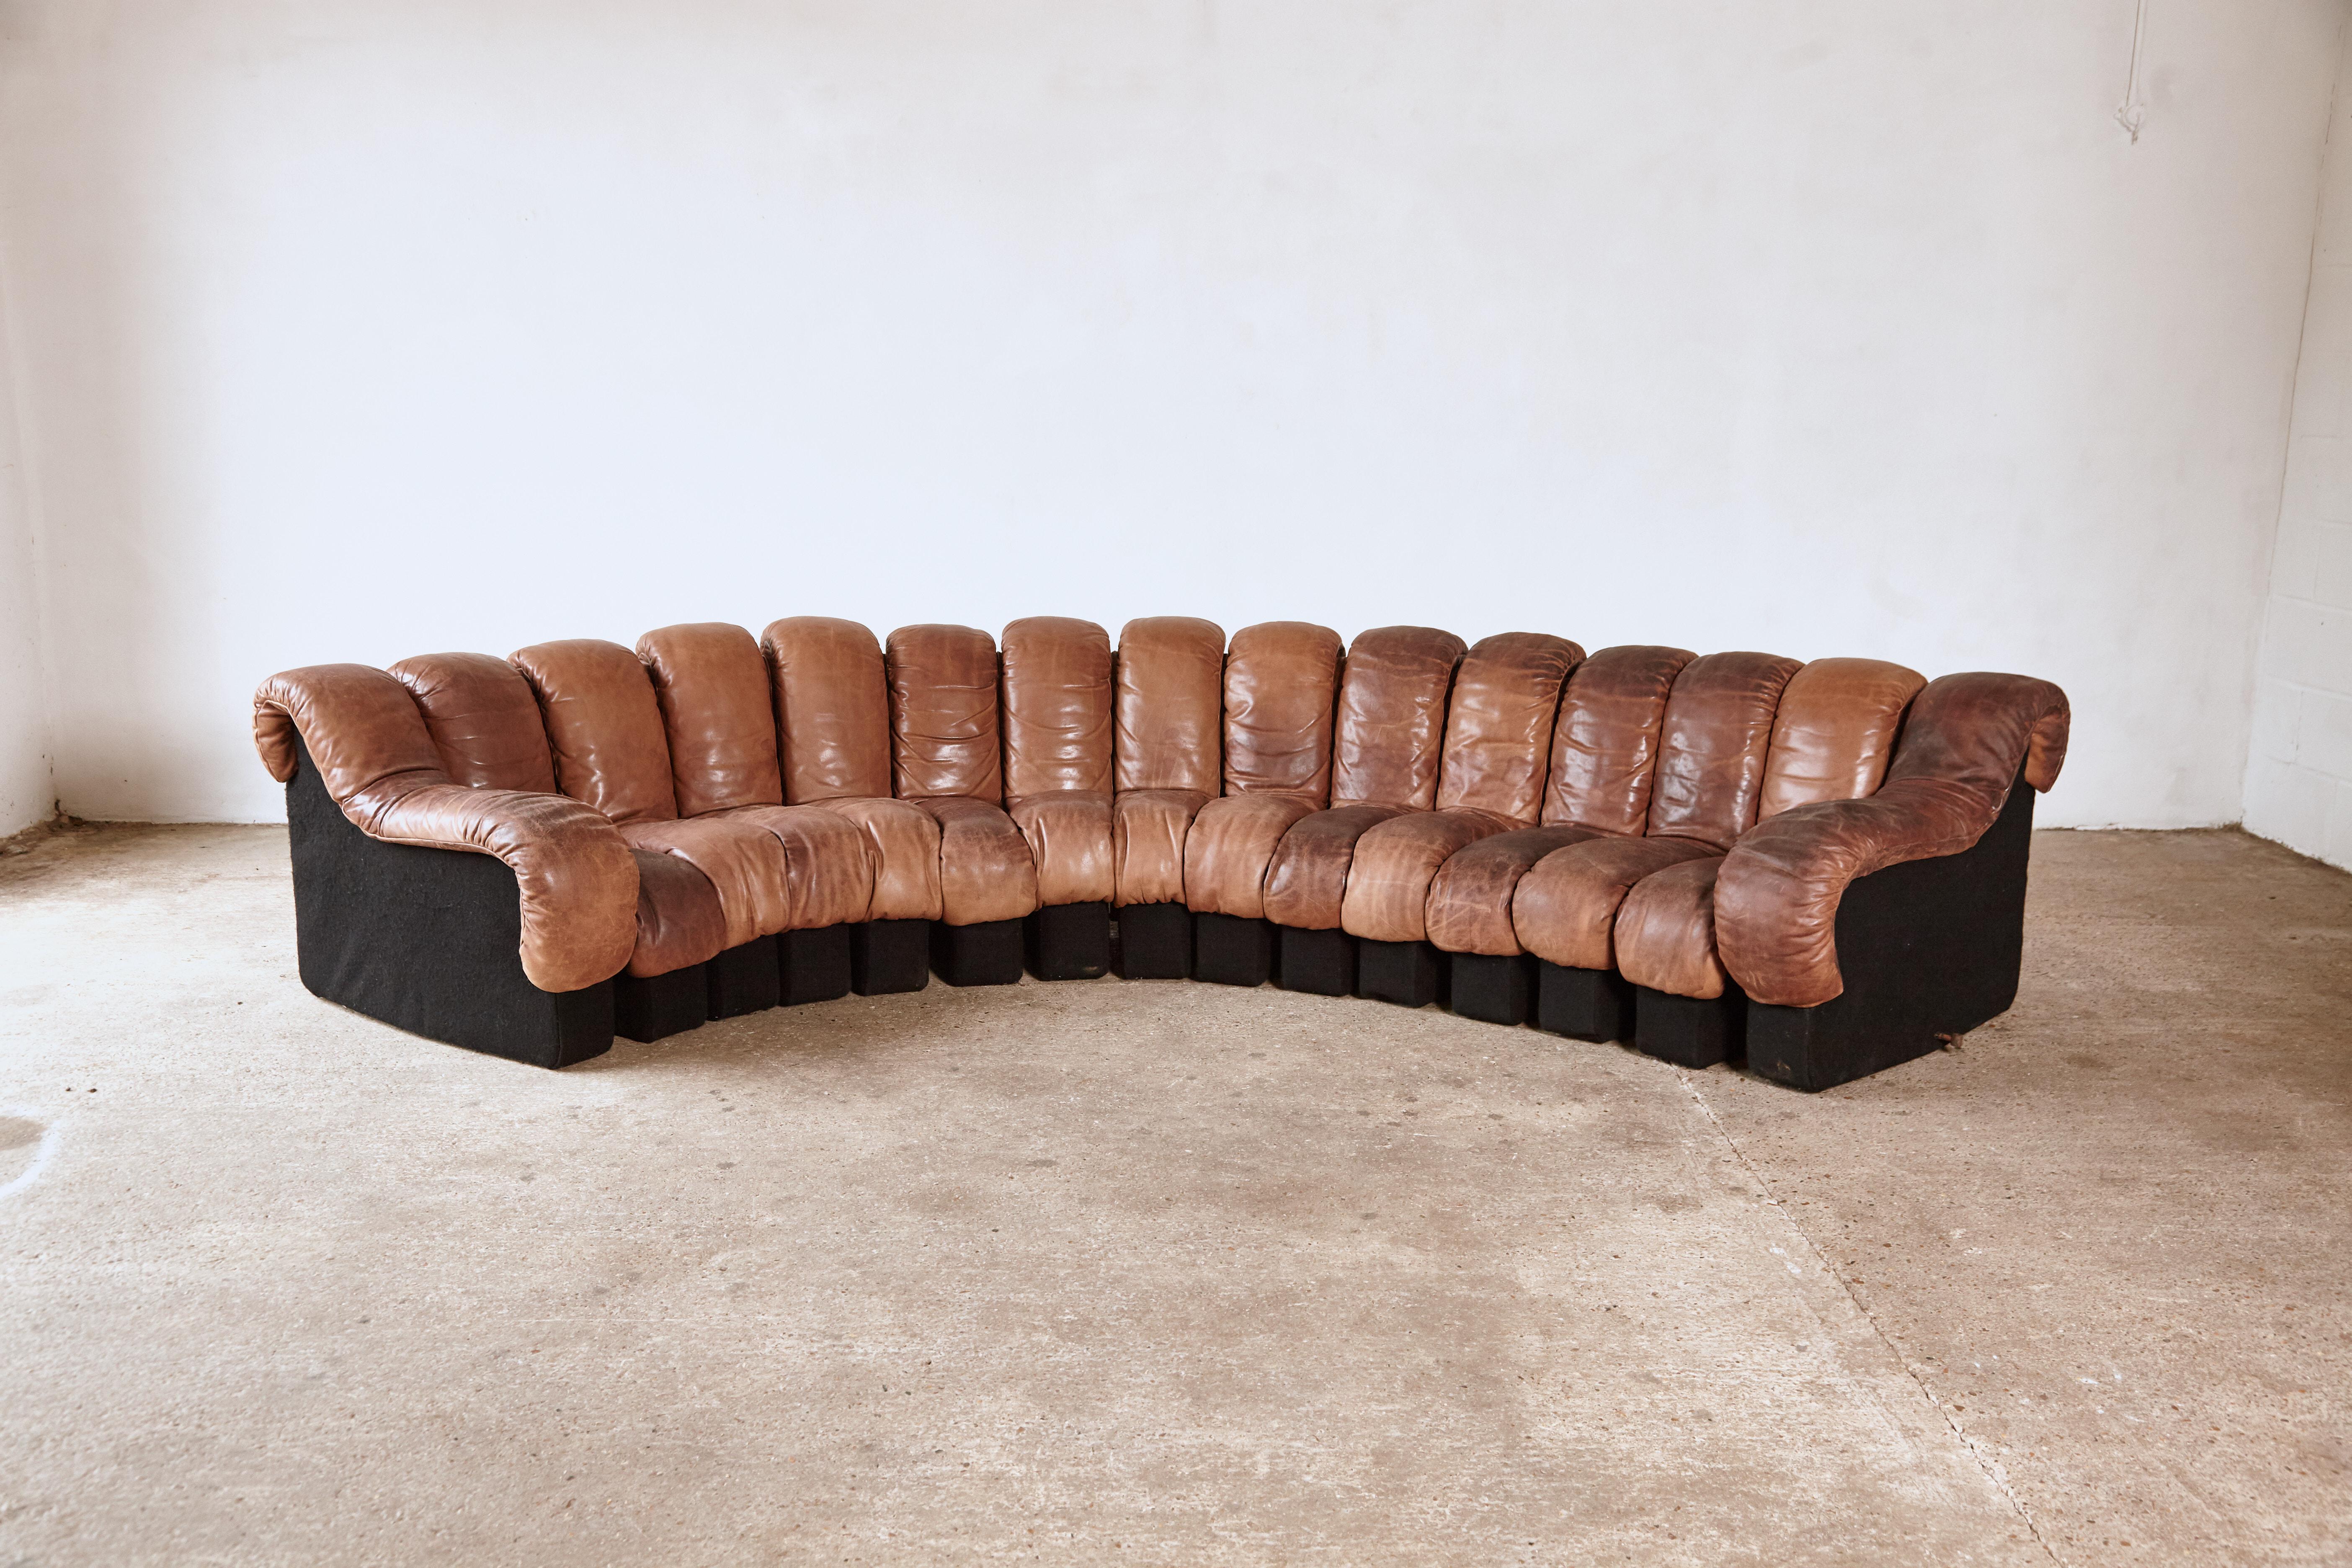 Super patinated De Sede DS-600 modular sectional nonstop sofa by Heinz Ulrich, Ueli bergere and Elenora Peduzzi-Riva, 1970s, Switzerland. Original brown leather seating with felt bases. 15 elements which zip together and apart. Modules can be added